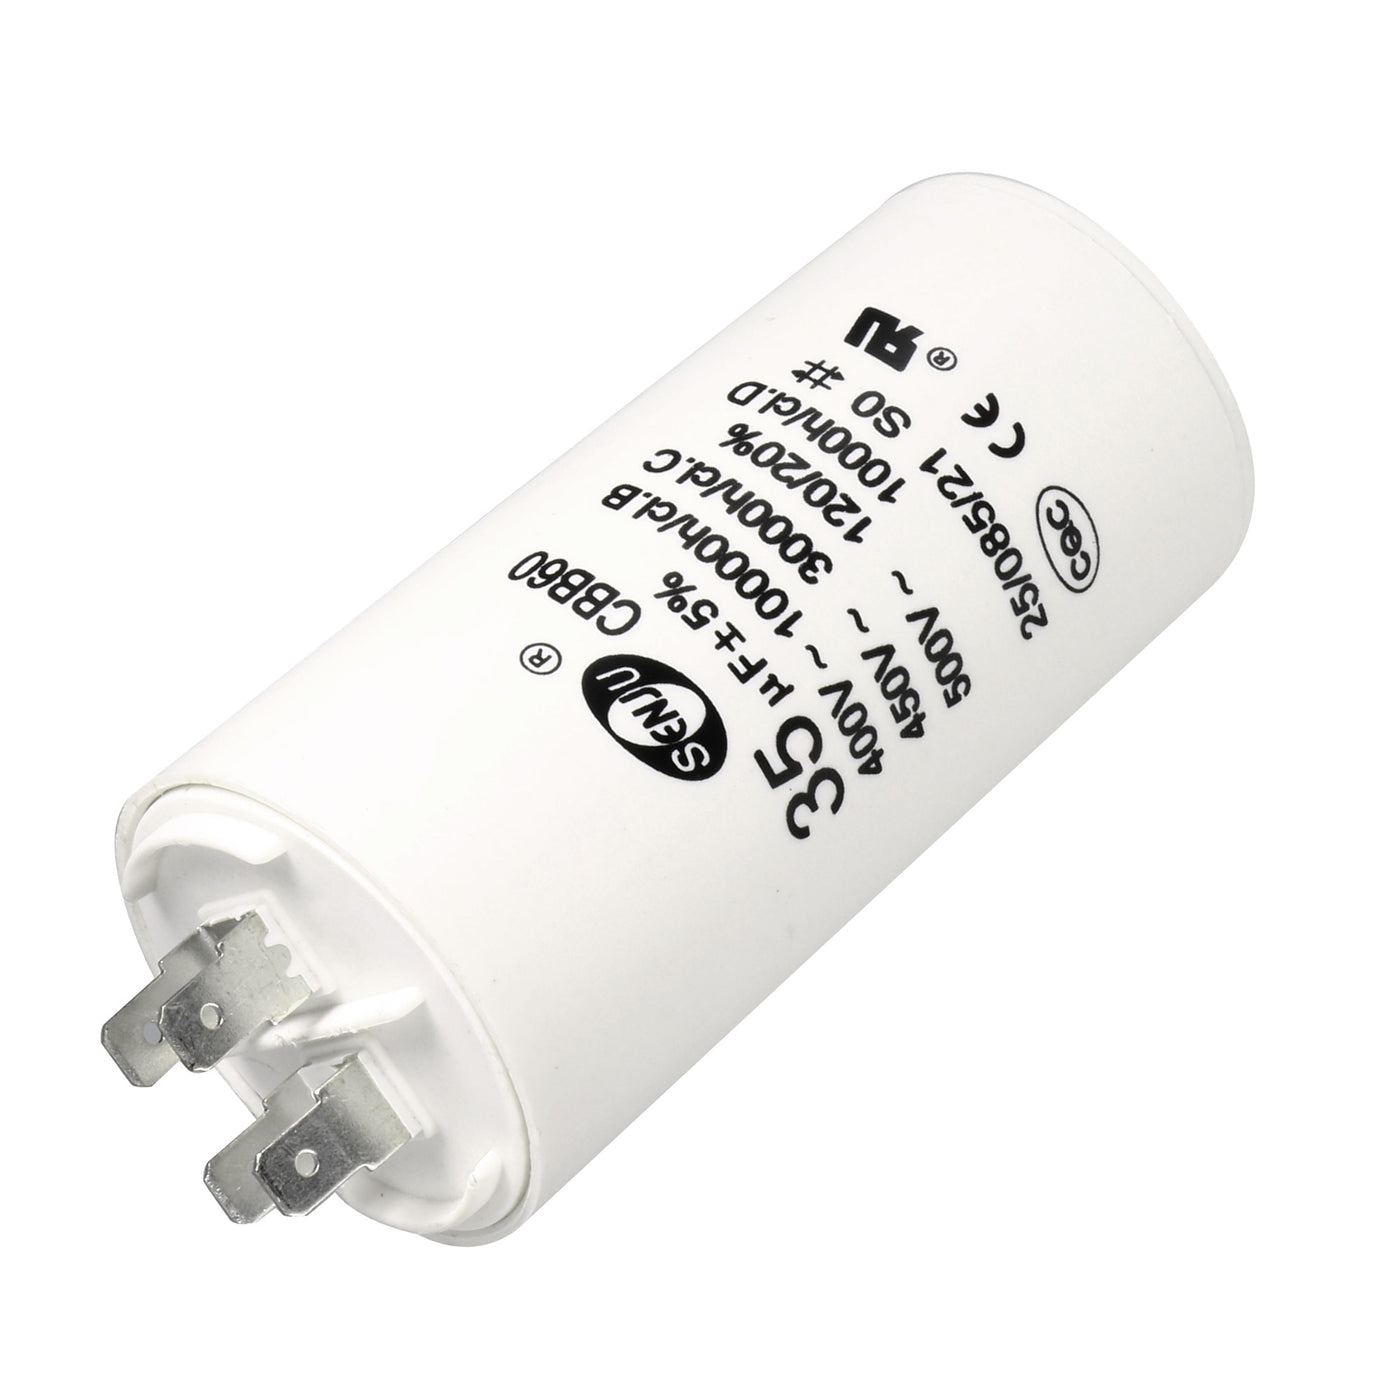 uxcell Uxcell CBB60 Run Capacitor 35uF 450V AC Double Insert 50/60Hz Cylinder 92x44mm White for Air Compressor Water Pump Motor